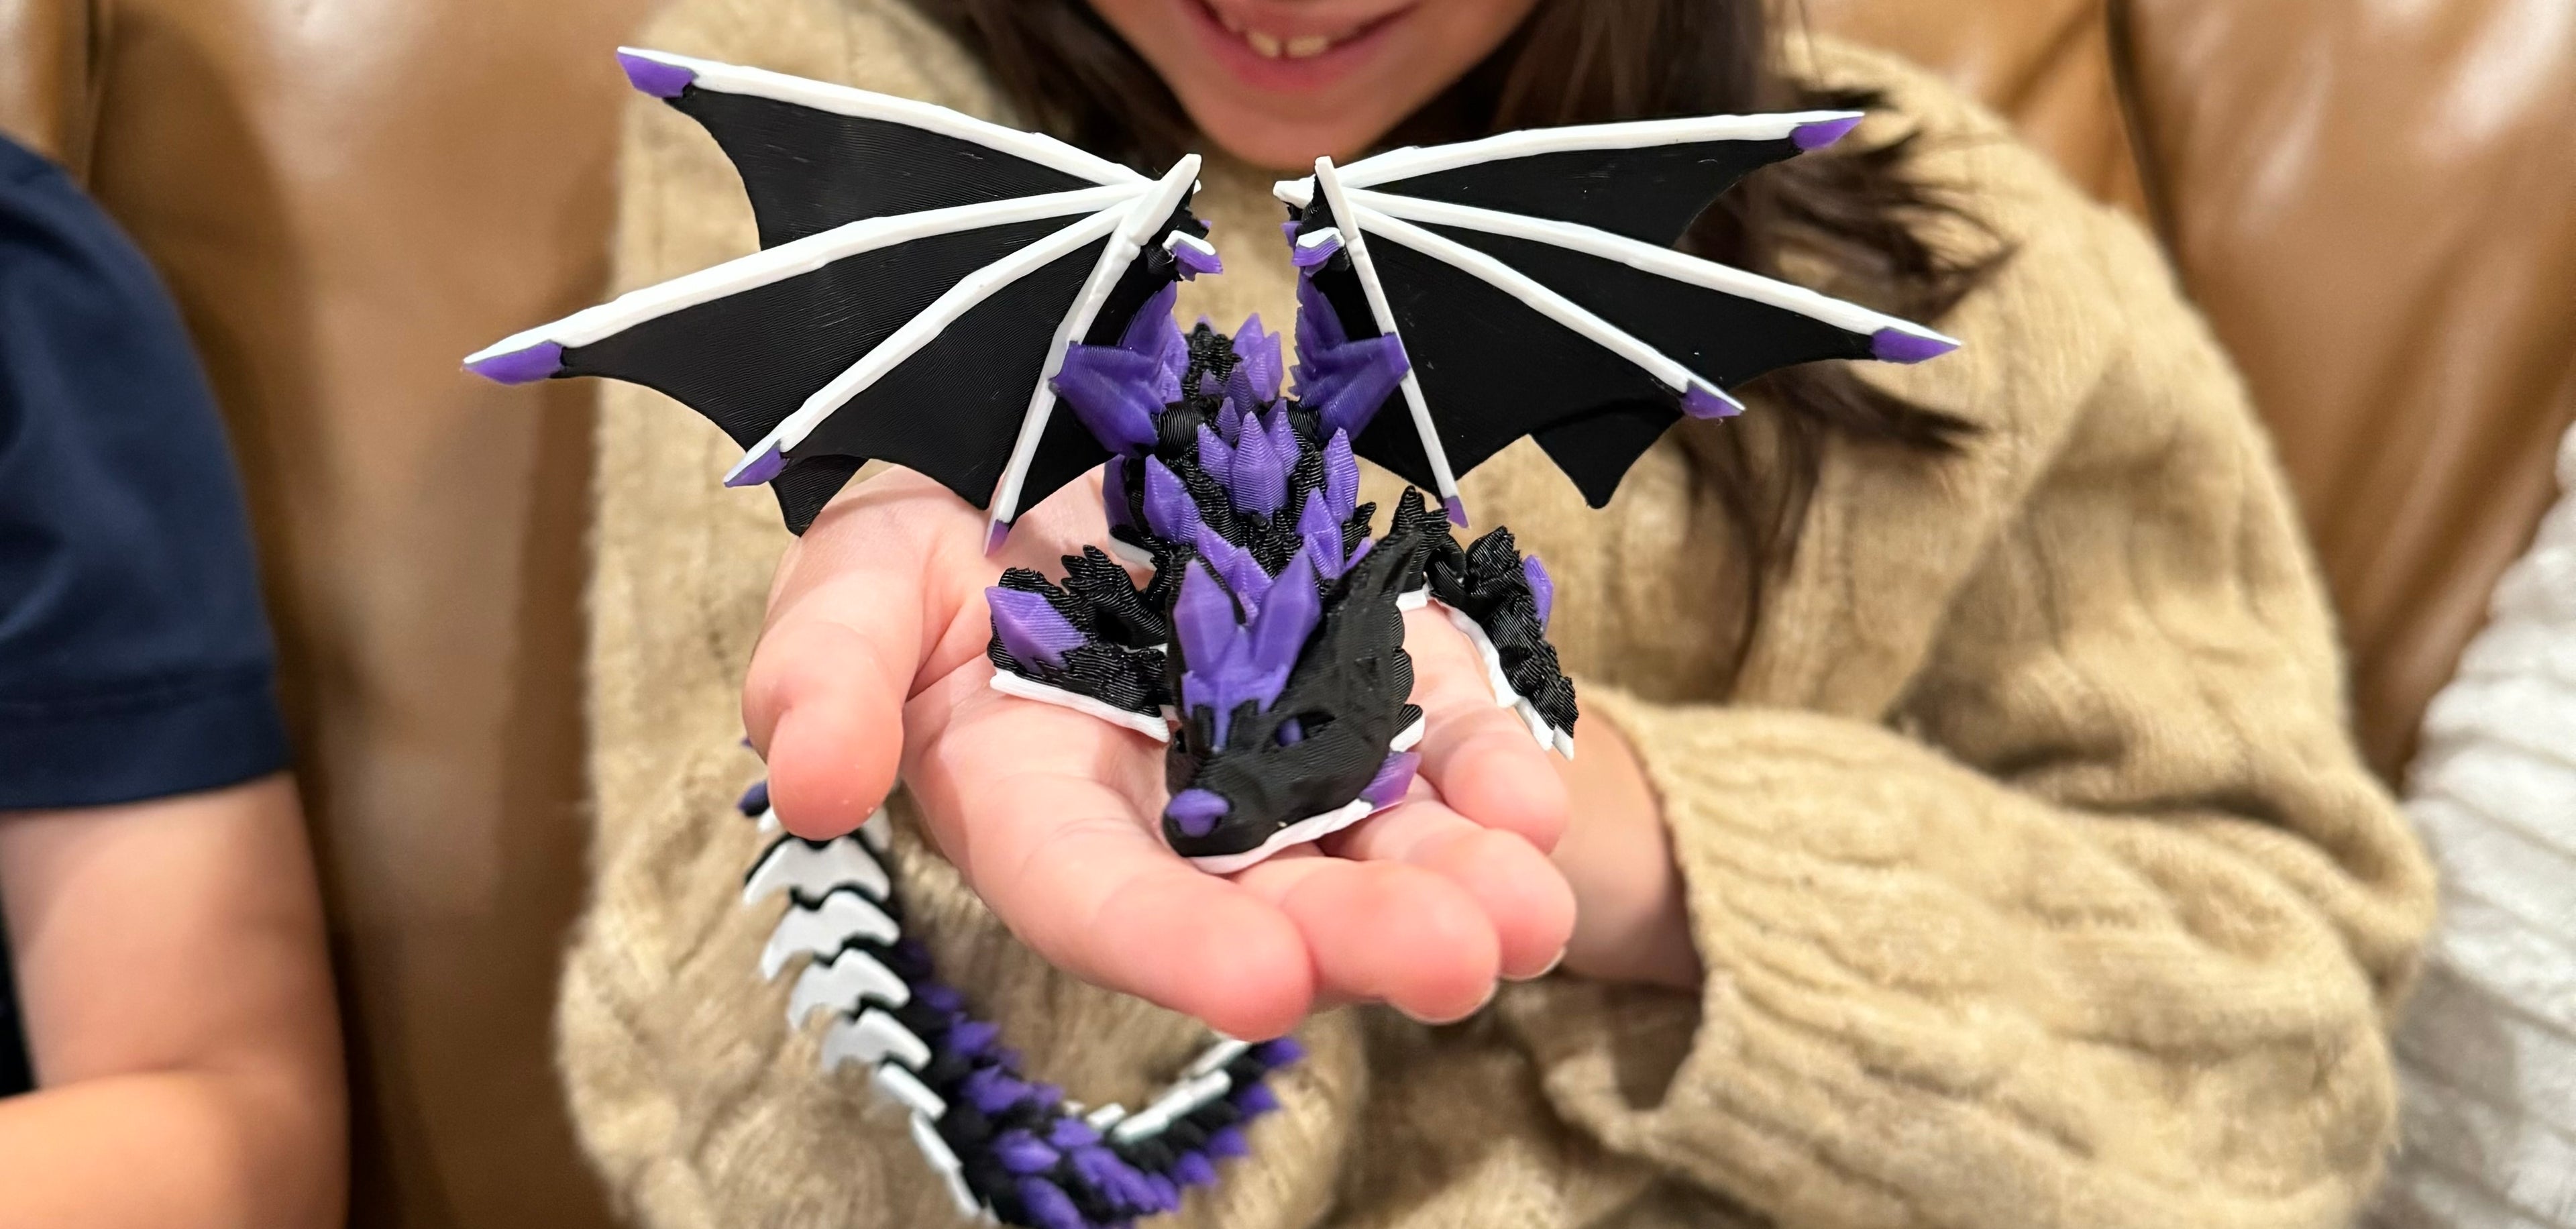 Black 3D-Printed Crystal Wolf Dragon being held by Child